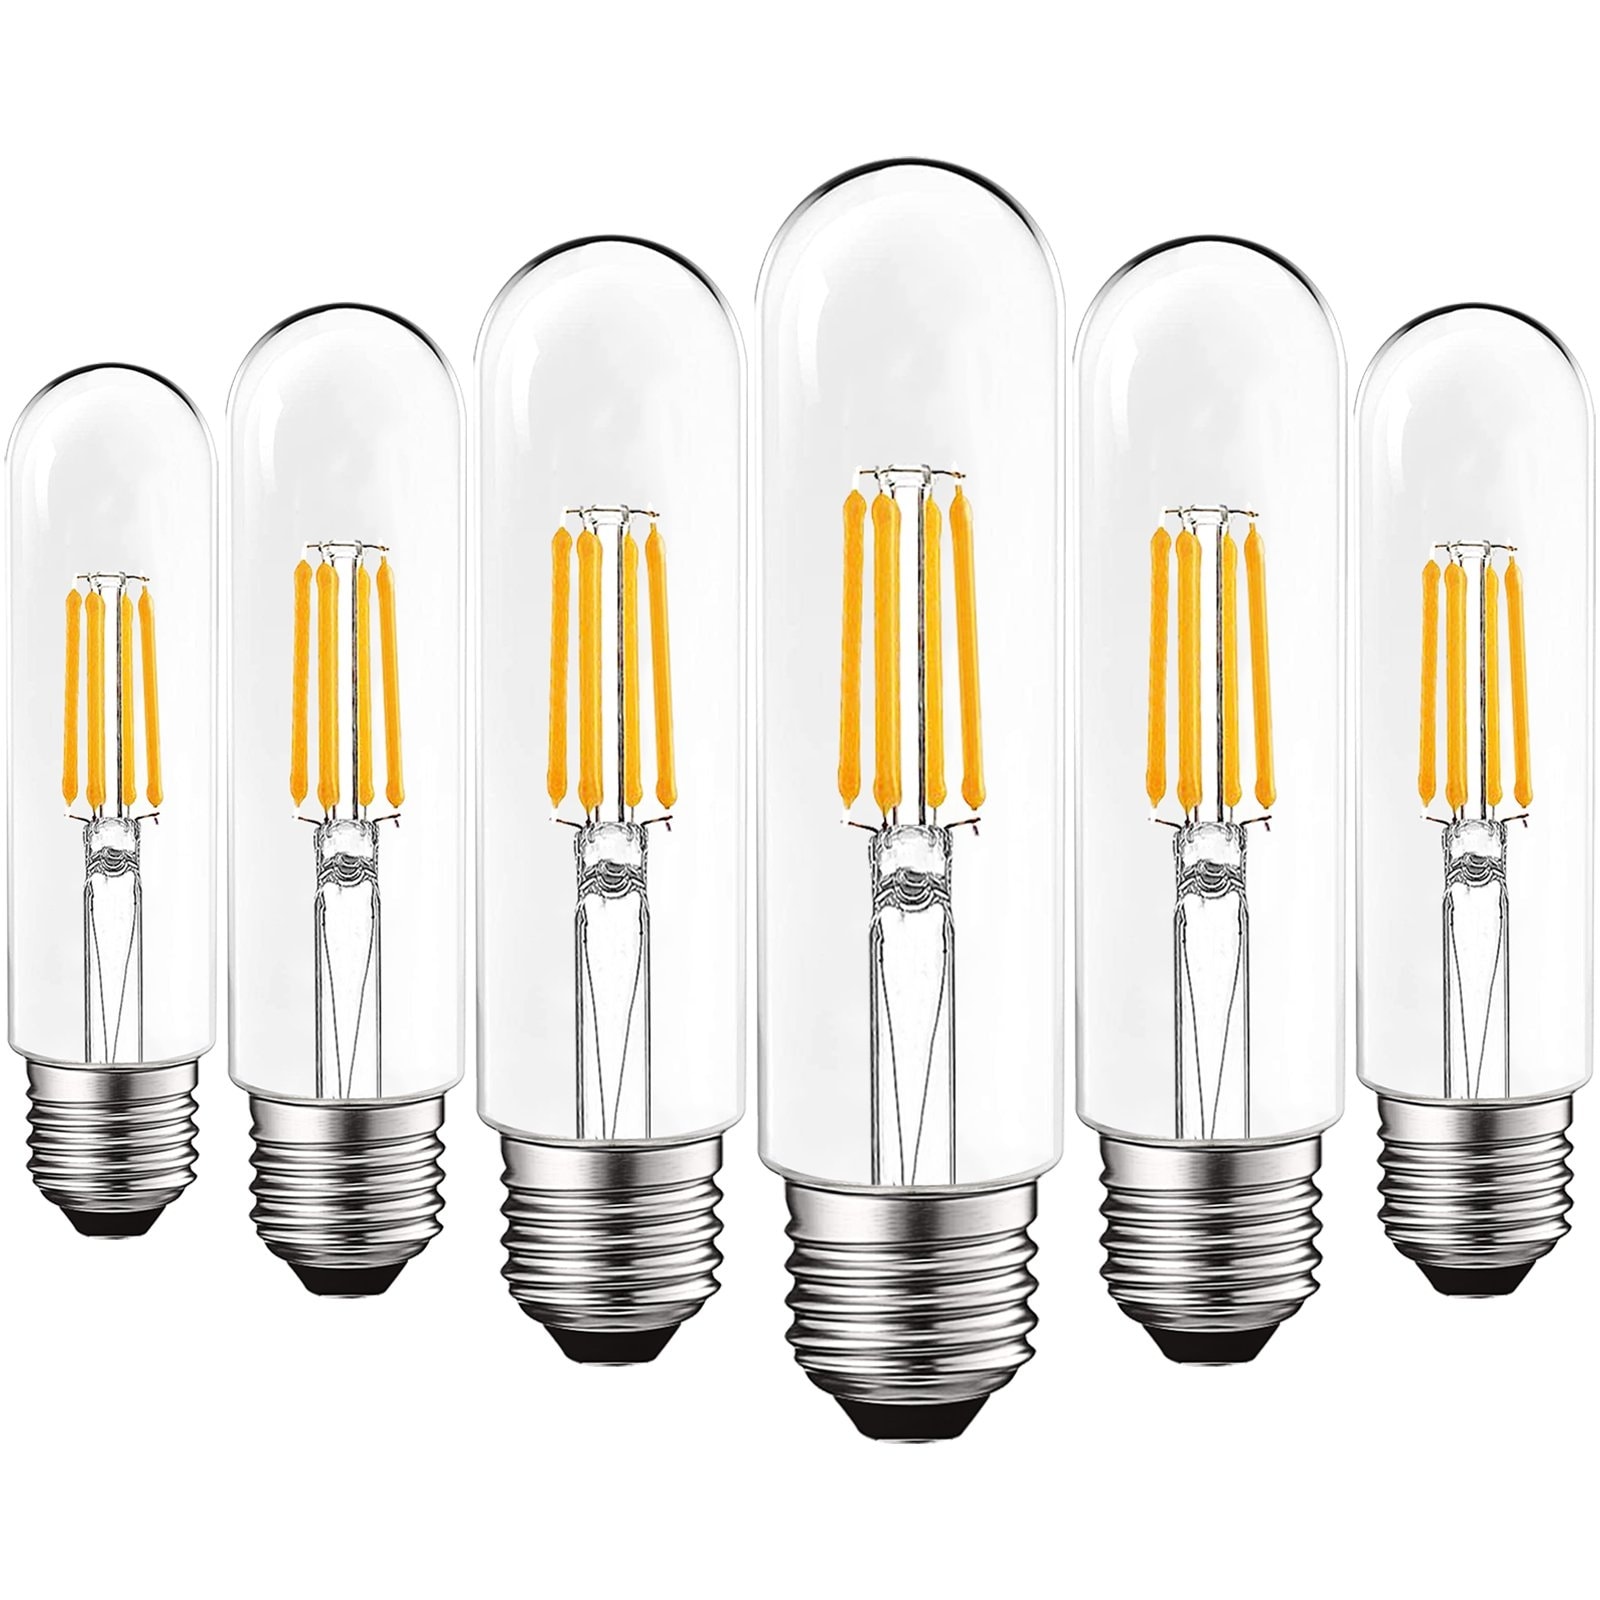 iRotYi 6W AC 120V Dimmable LED Filament Light Bulb Gold Tint 60W Incandescent Bulbs Replacement Vintage Candelabra Bulbs E12 Base Lamp Cool White 6500 Kelvin 600LM 10-Pack